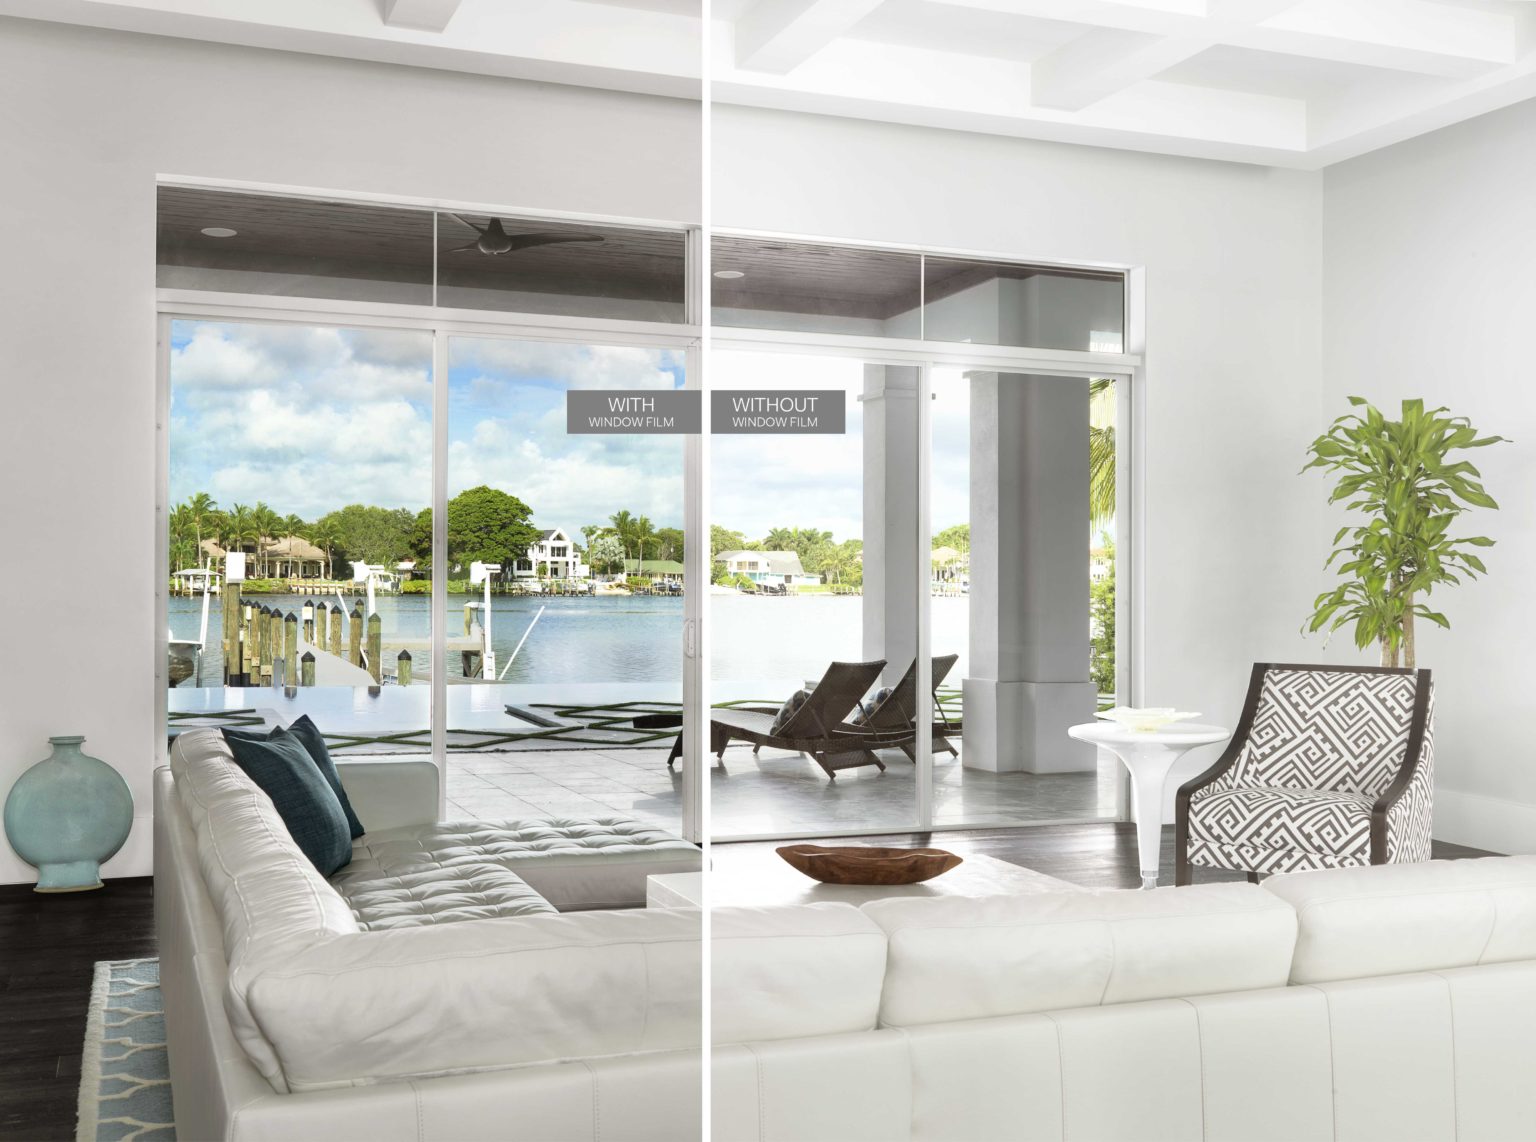 Picture divided in half comparing a room with and without window film